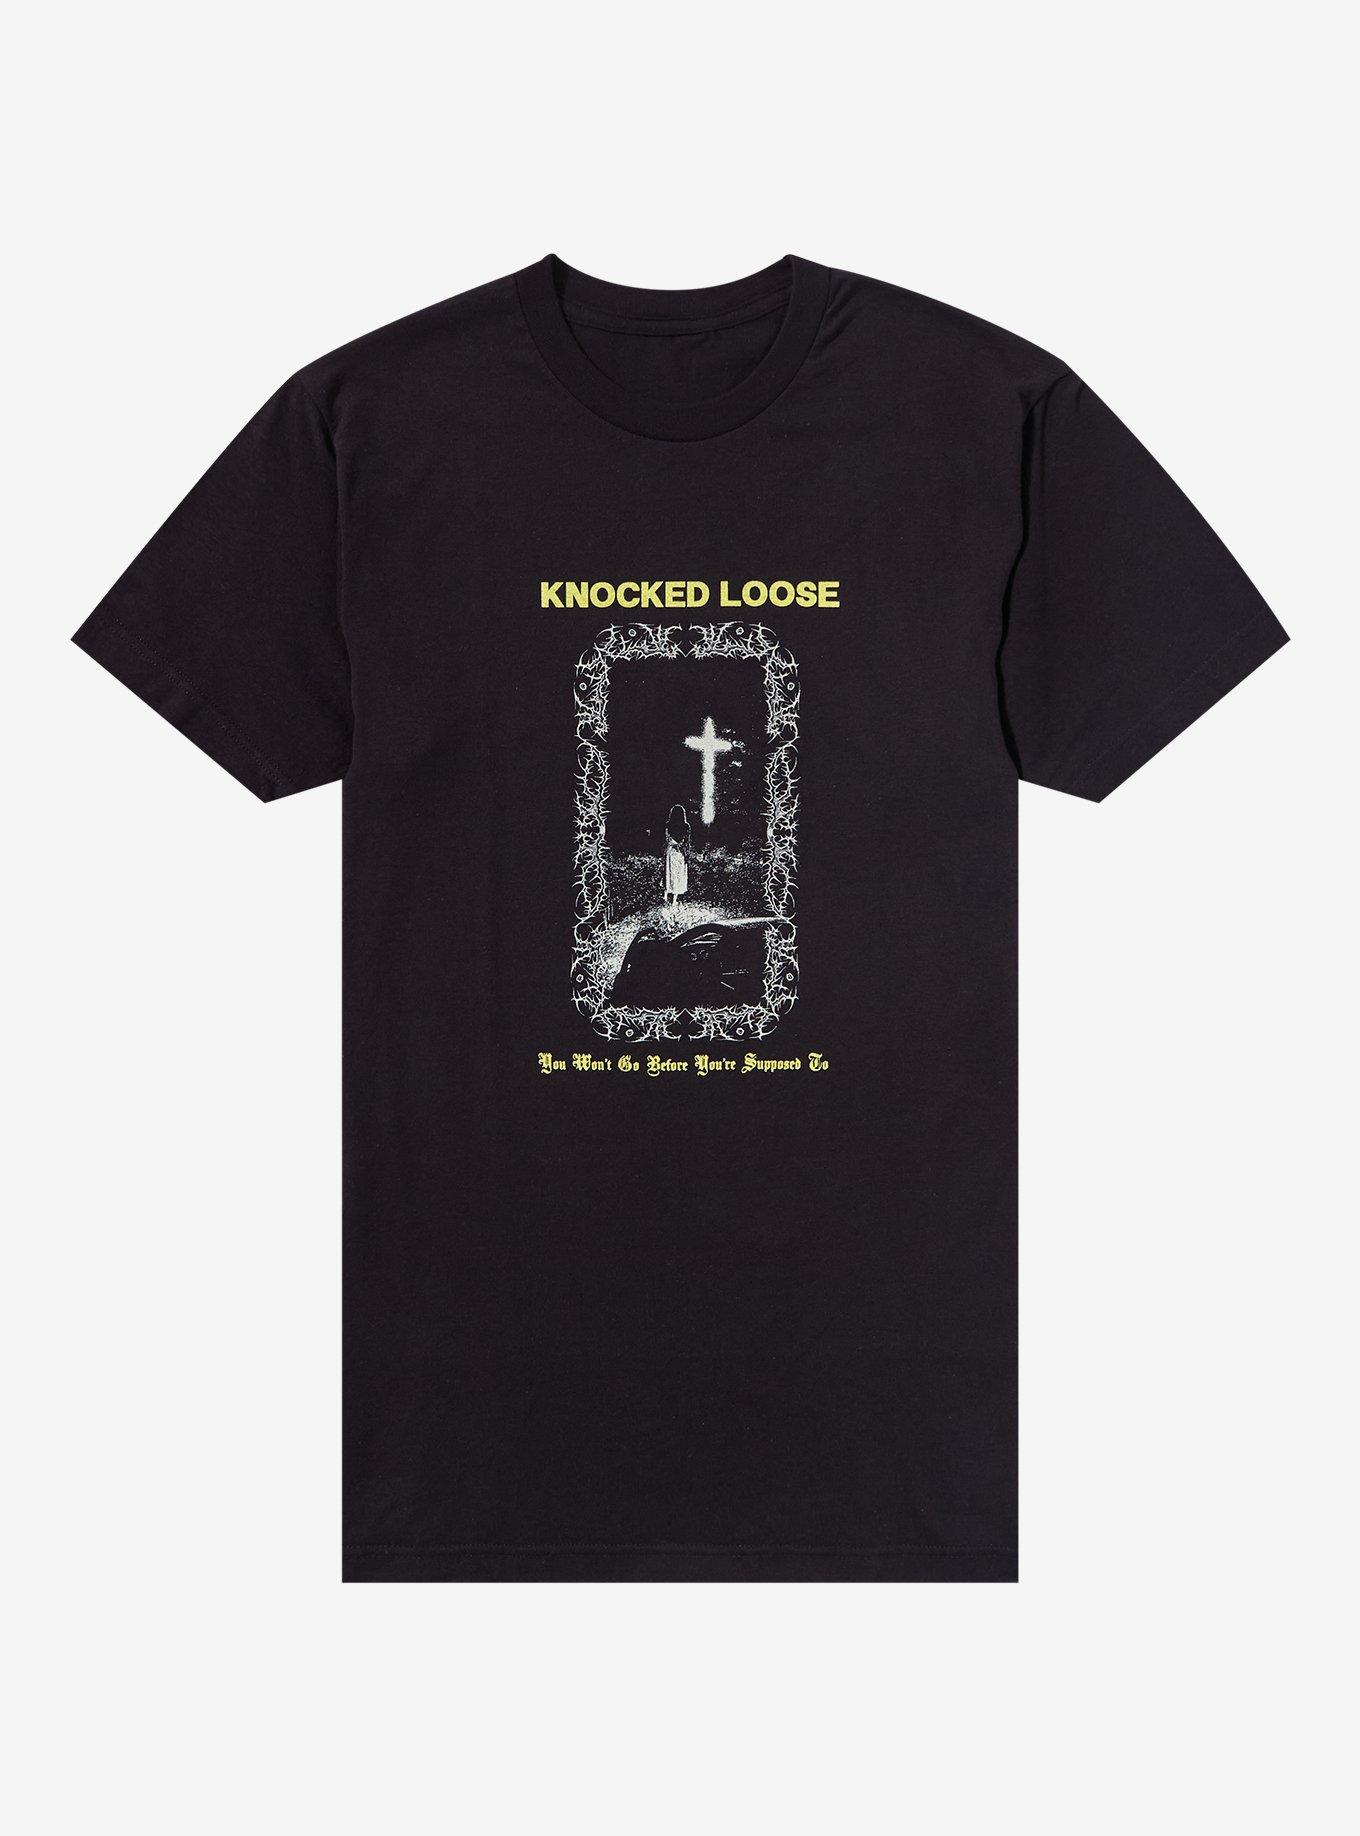 Knocked Loose You Won't Go Before You're Supposed To Album Artwork T-Shirt, BLACK, hi-res